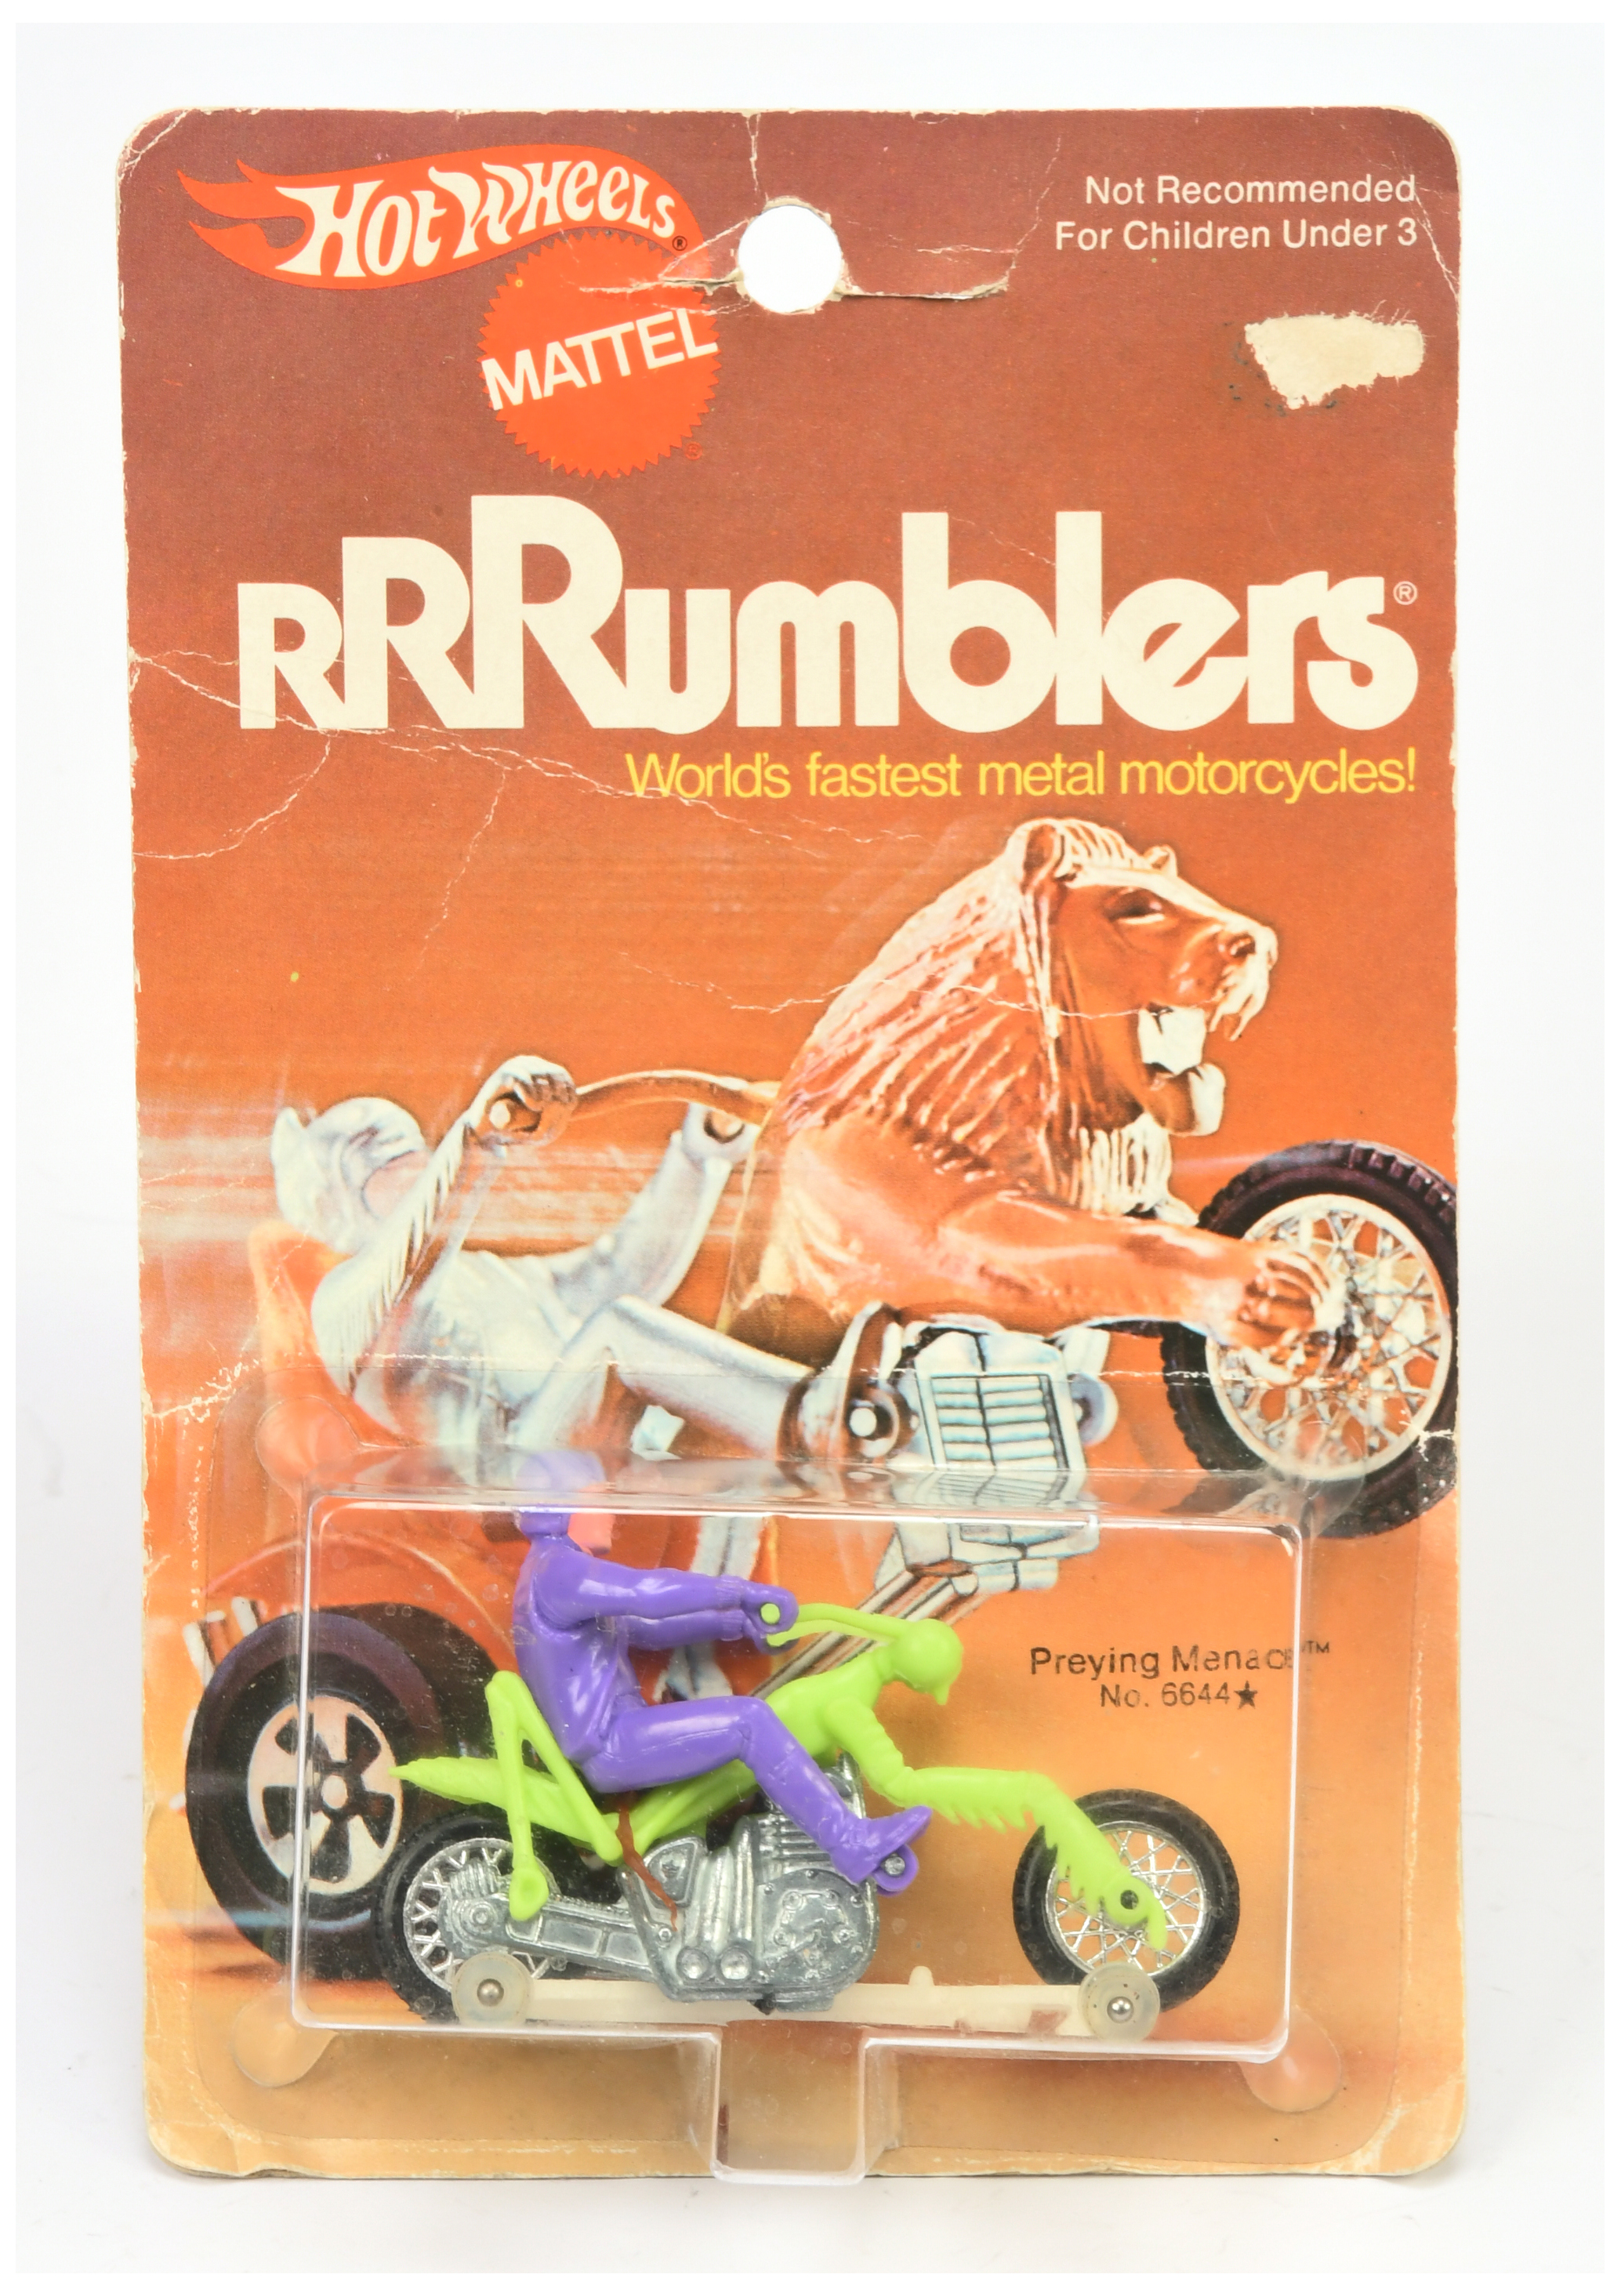 Mattel Hot Wheels RRRumblers 6644 Preying Menace - Lime green body with purple rider and hat, wit...